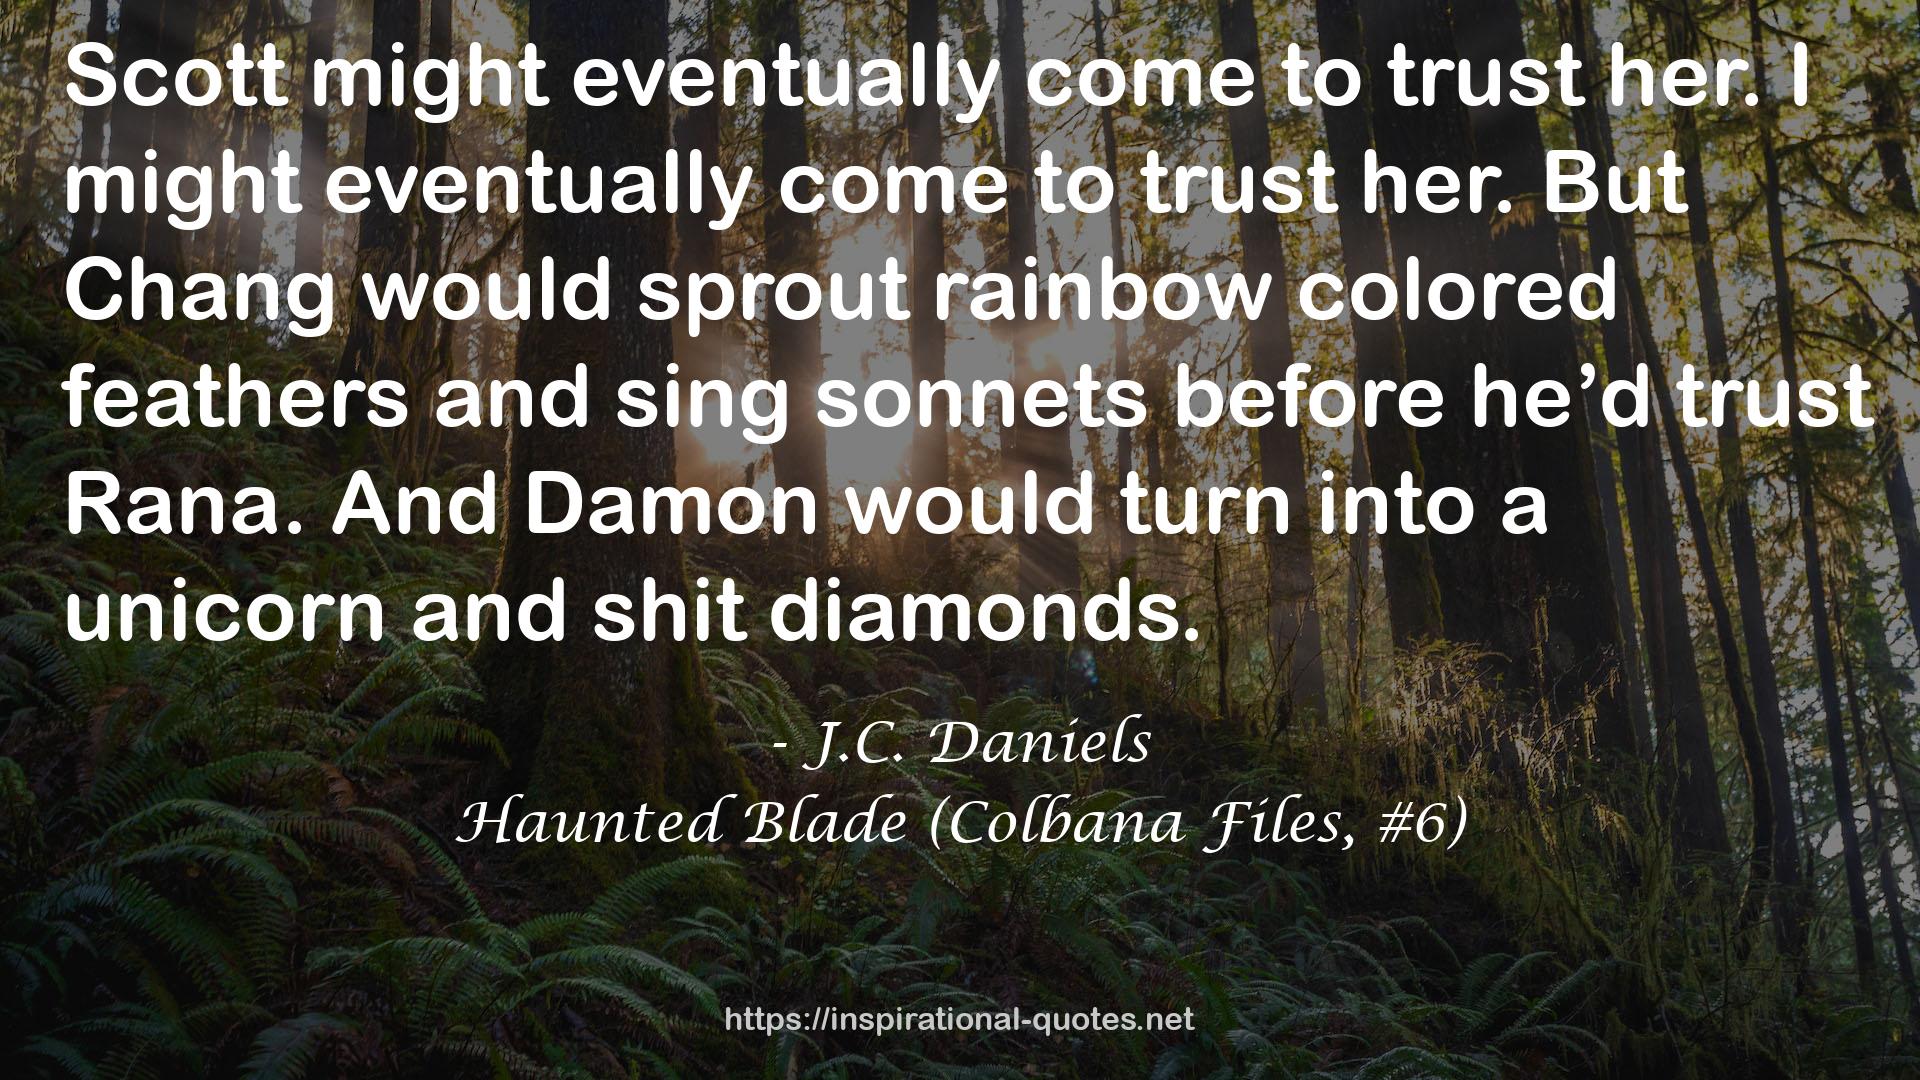 Haunted Blade (Colbana Files, #6) QUOTES